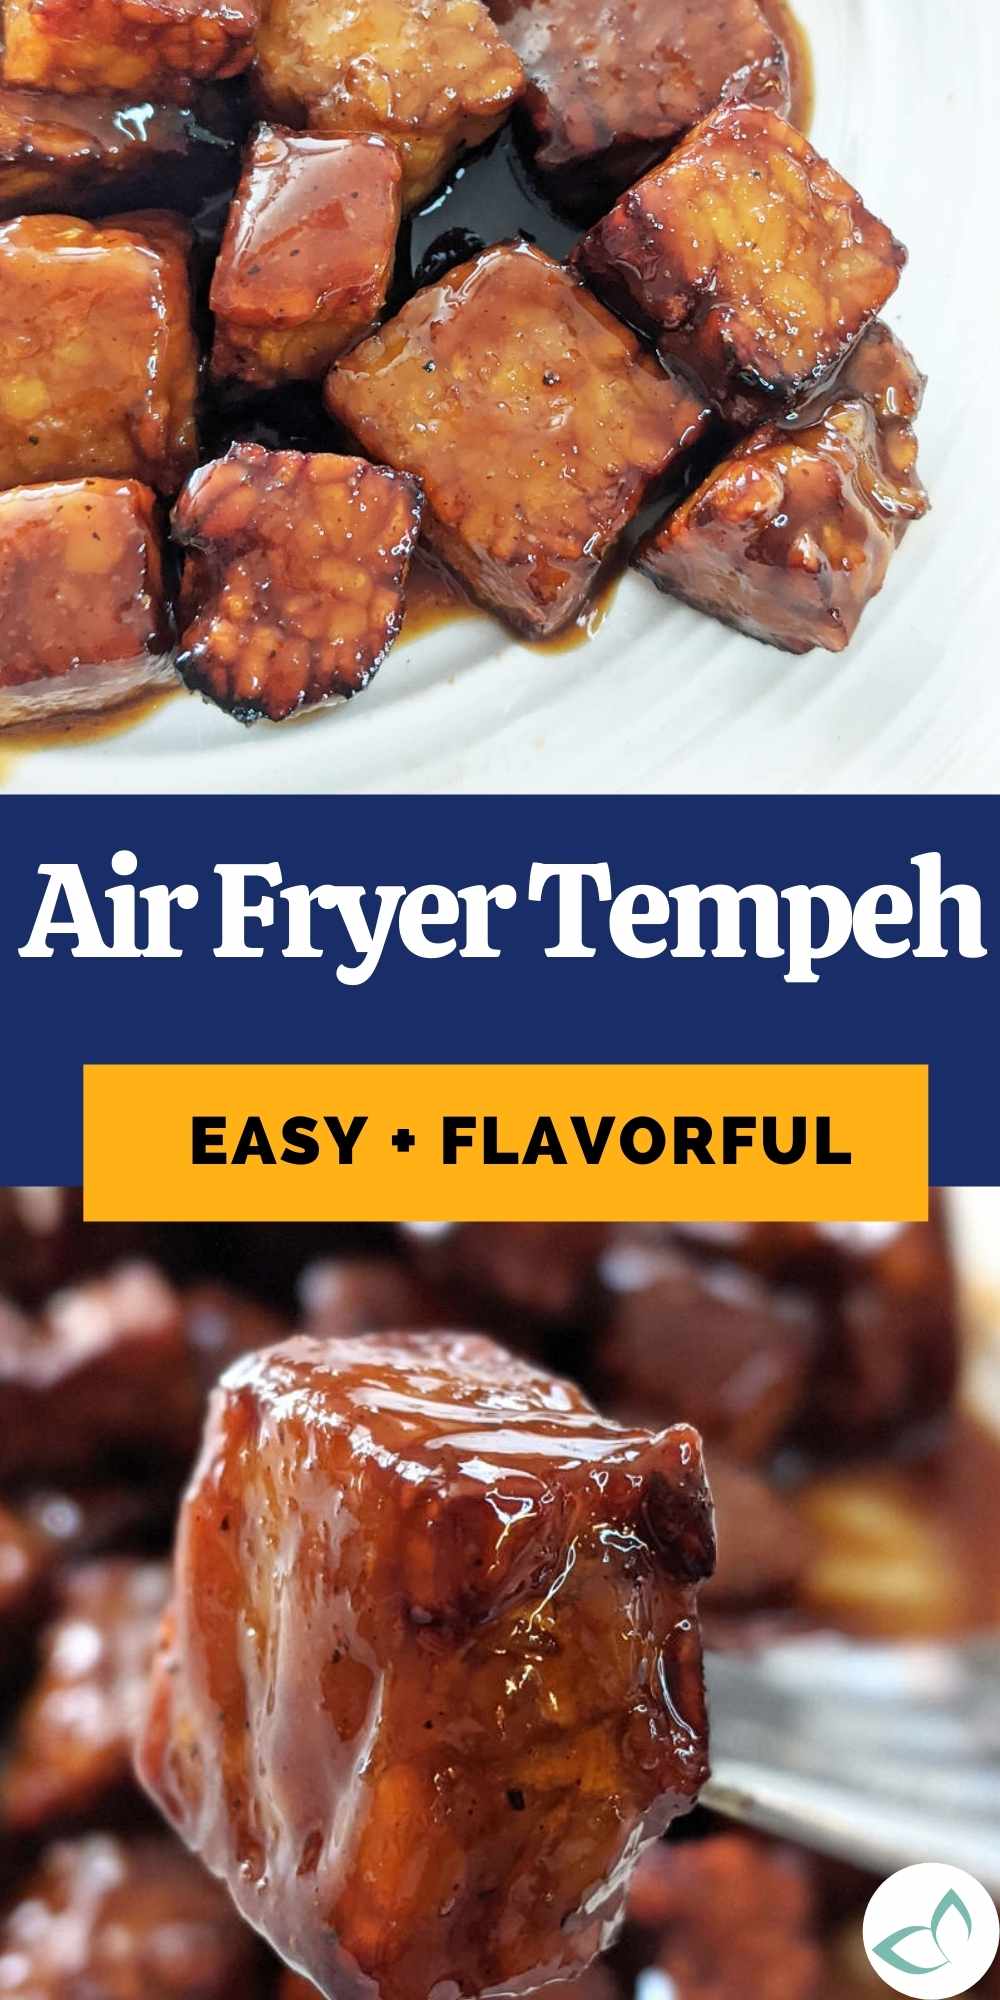 Pinterest image of air fryer tempeh with text overlay "air fryer tempeh easy + flavorful."